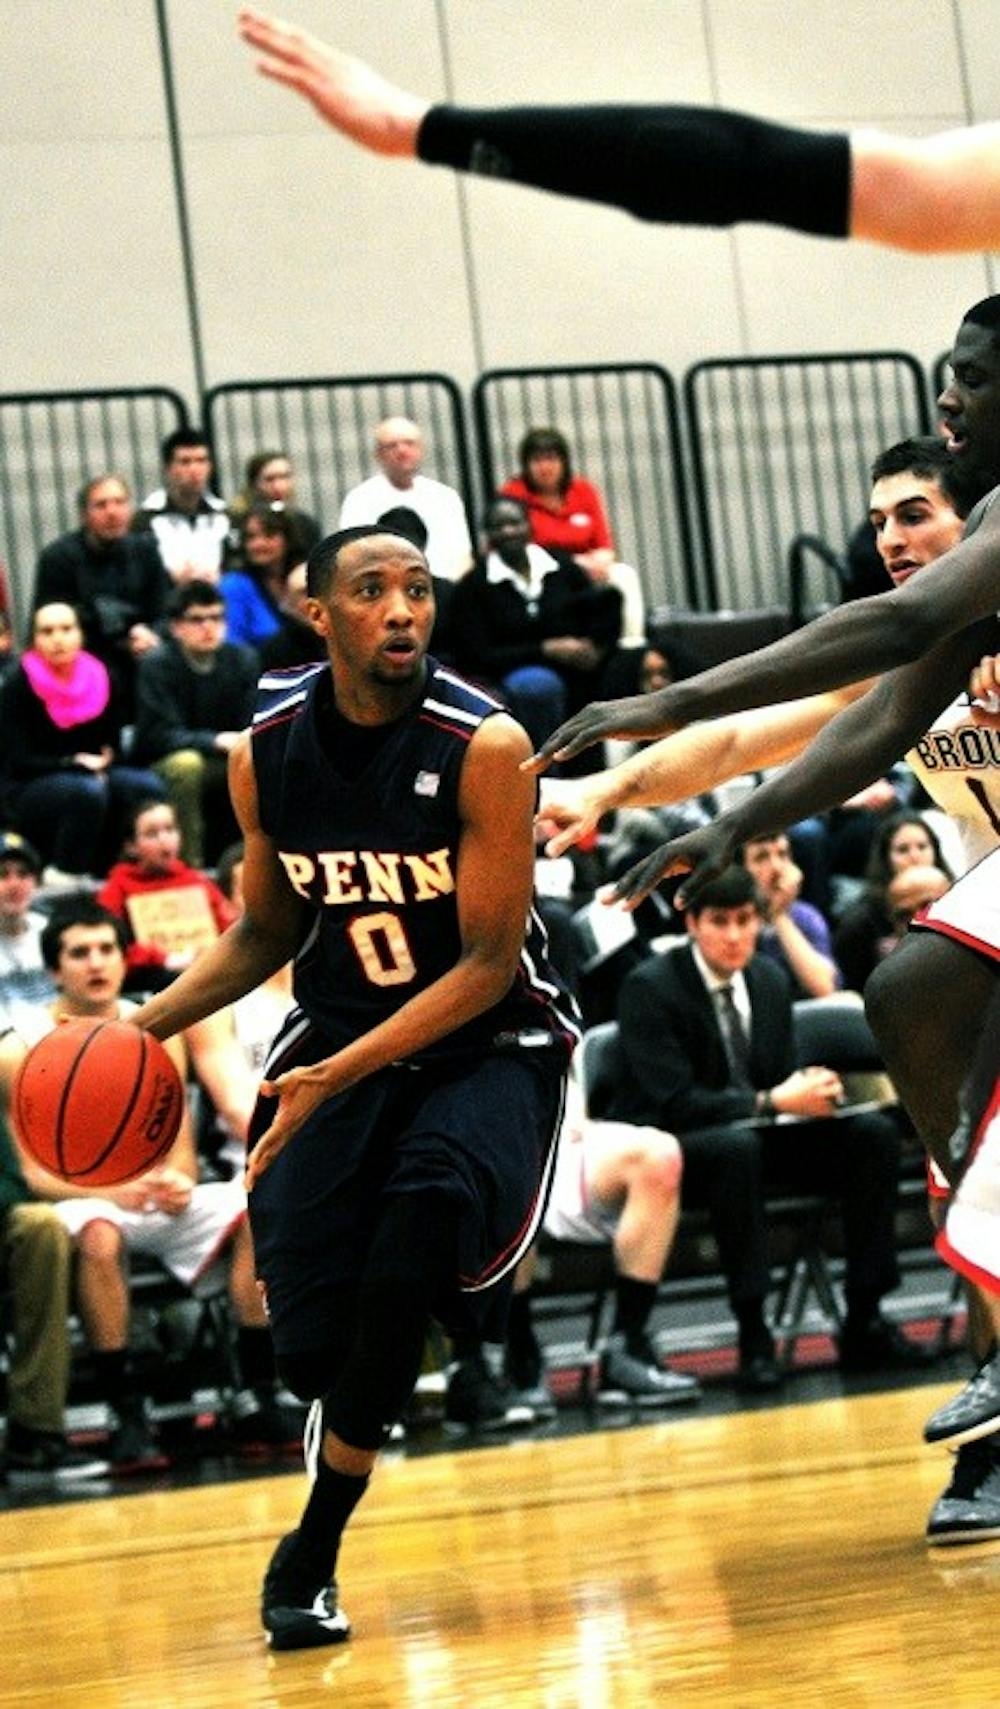 	Junior guard Miles Cartwright went 8-for-12 from the field and 4-for-4 from beyond the arc to score 25 points and lead Penn to a 66-64 squeaker over Brown.